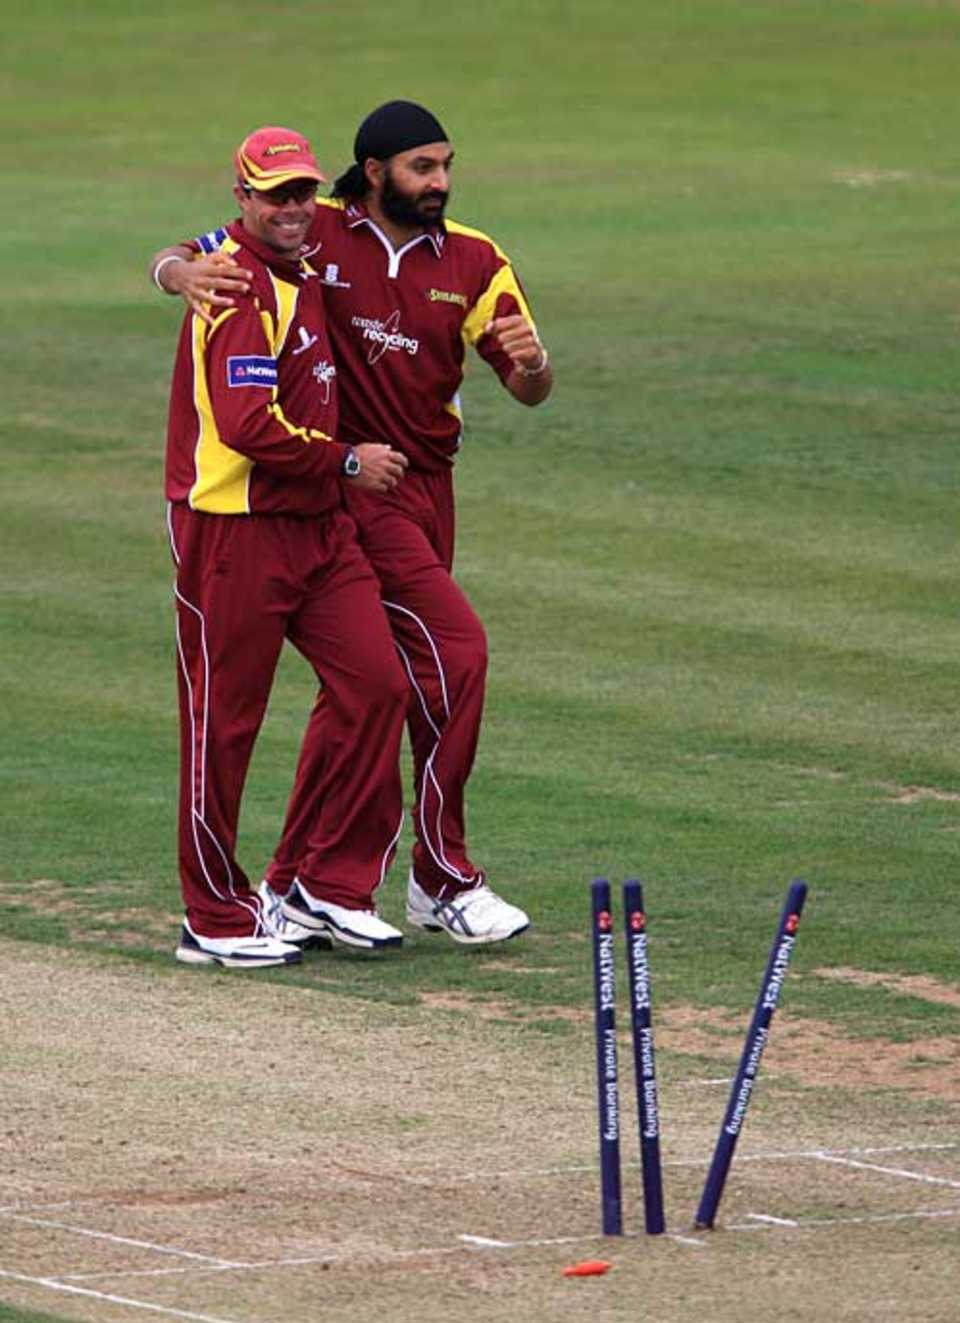 Monty Panesar enjoyed a rare wicket when he removed Matthew Spriegel, Northamptonshire v Surrey, Pro40, Wantage Road, September 13, 2009